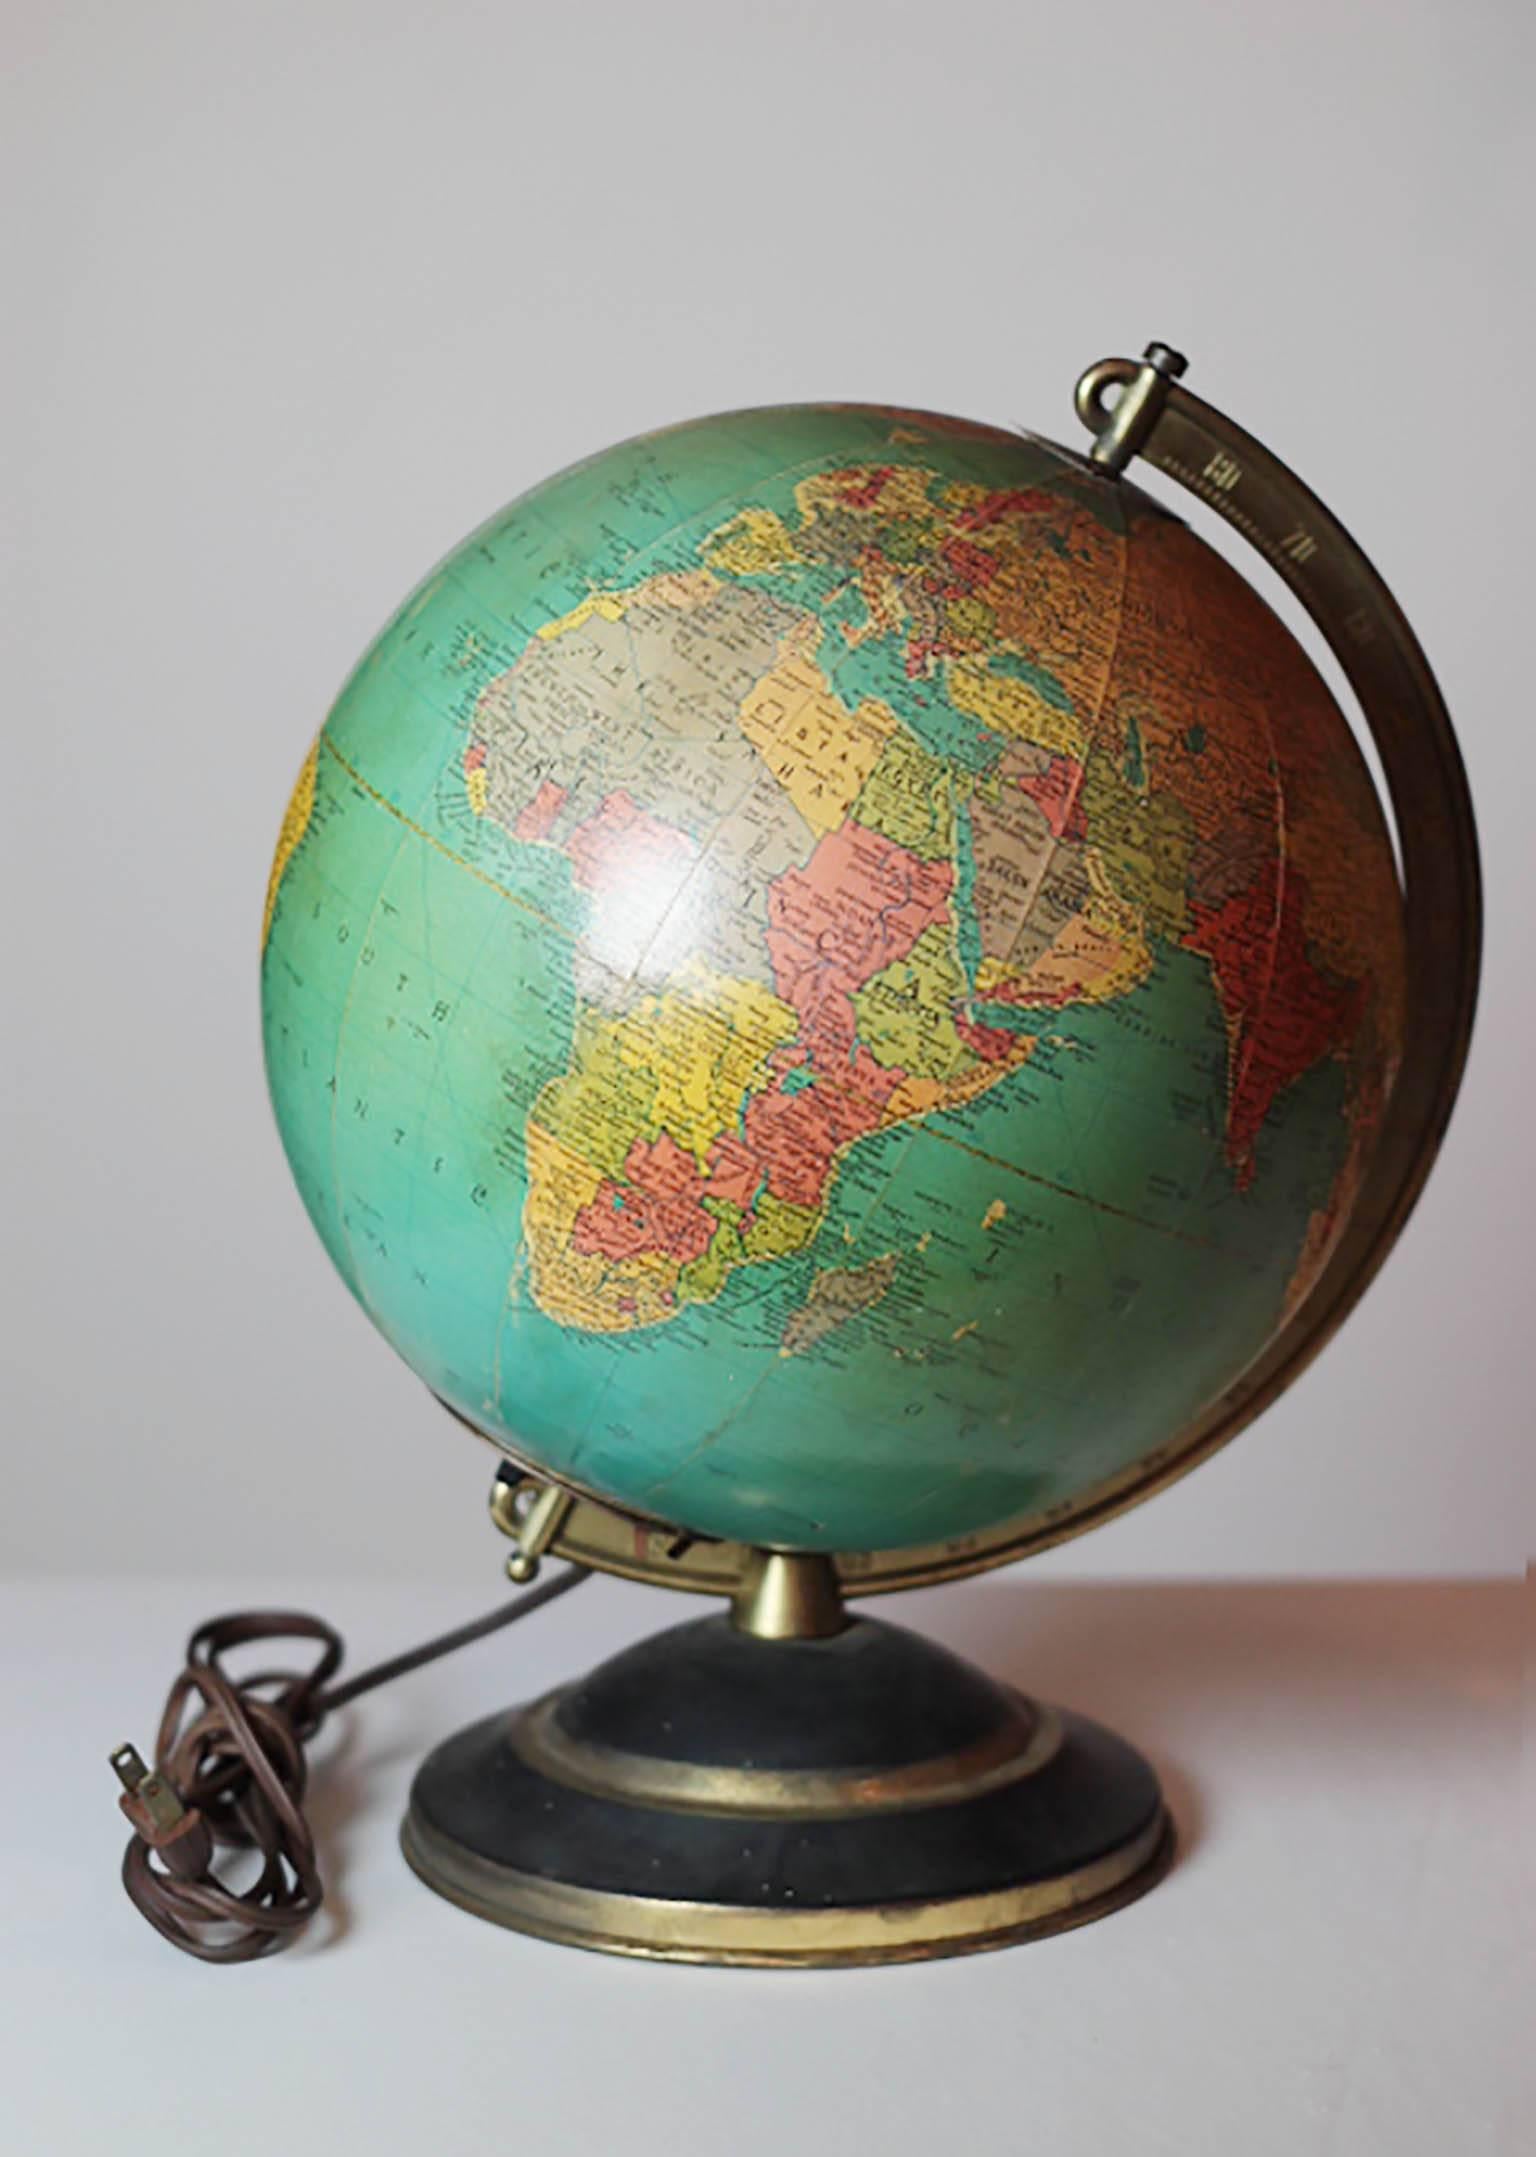 Illuminated glass globe with solid brass bracket and brass plated base. The globe plugs in and has an on/off switch at the base of the globe.
The cord is in excellent condition.